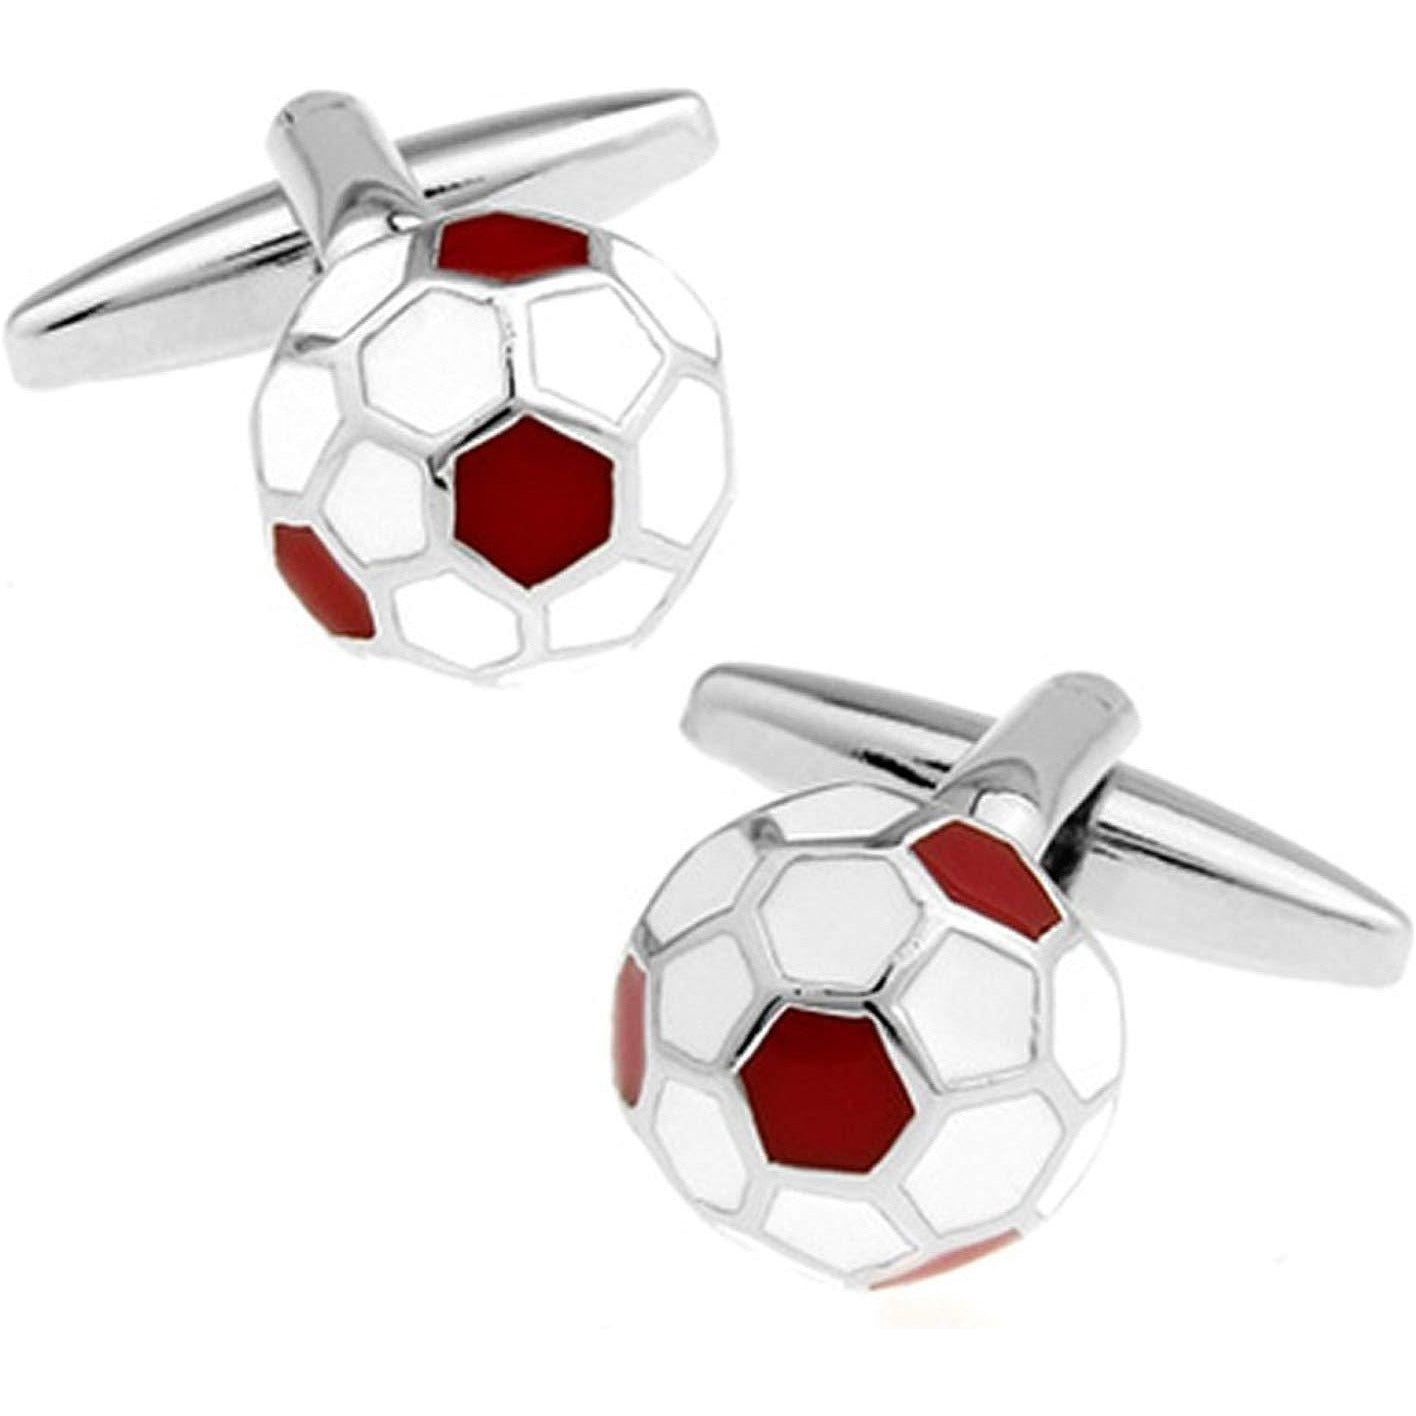 3D Red And White Football Cufflinks - Ashton and Finch